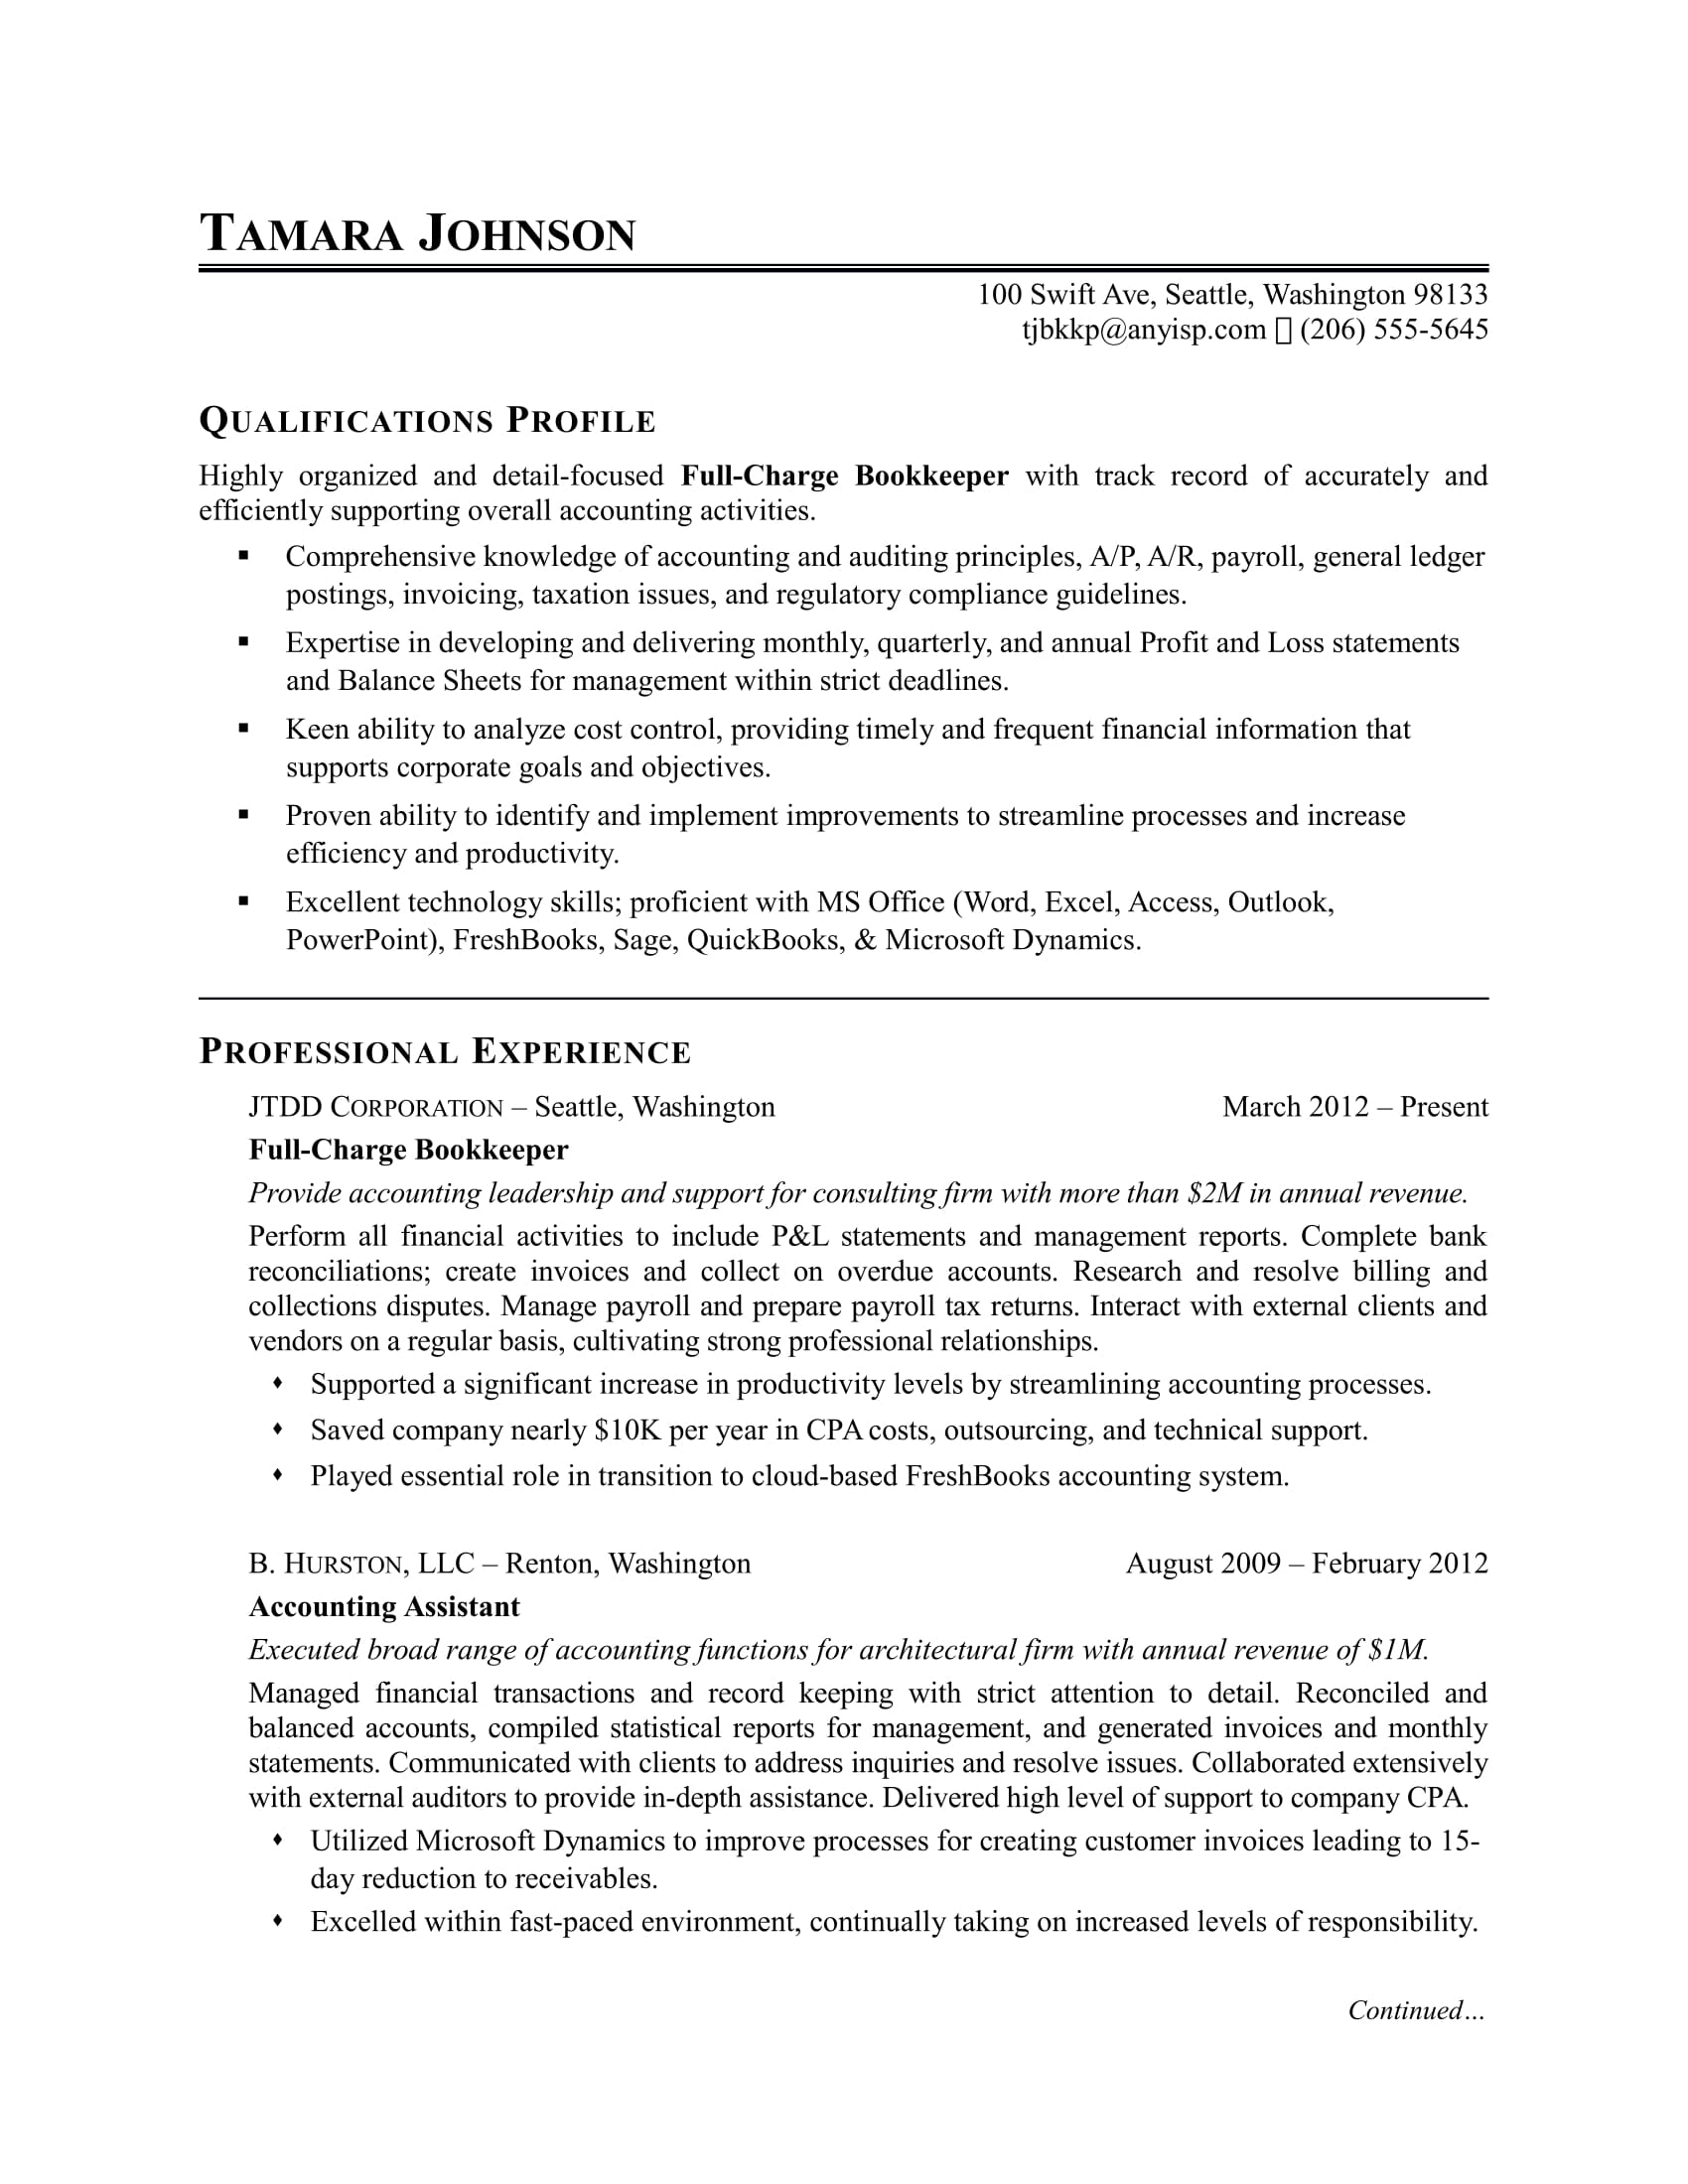 Bookkeeper Resume Sample | Monster within Bookkeeping Resume Templates